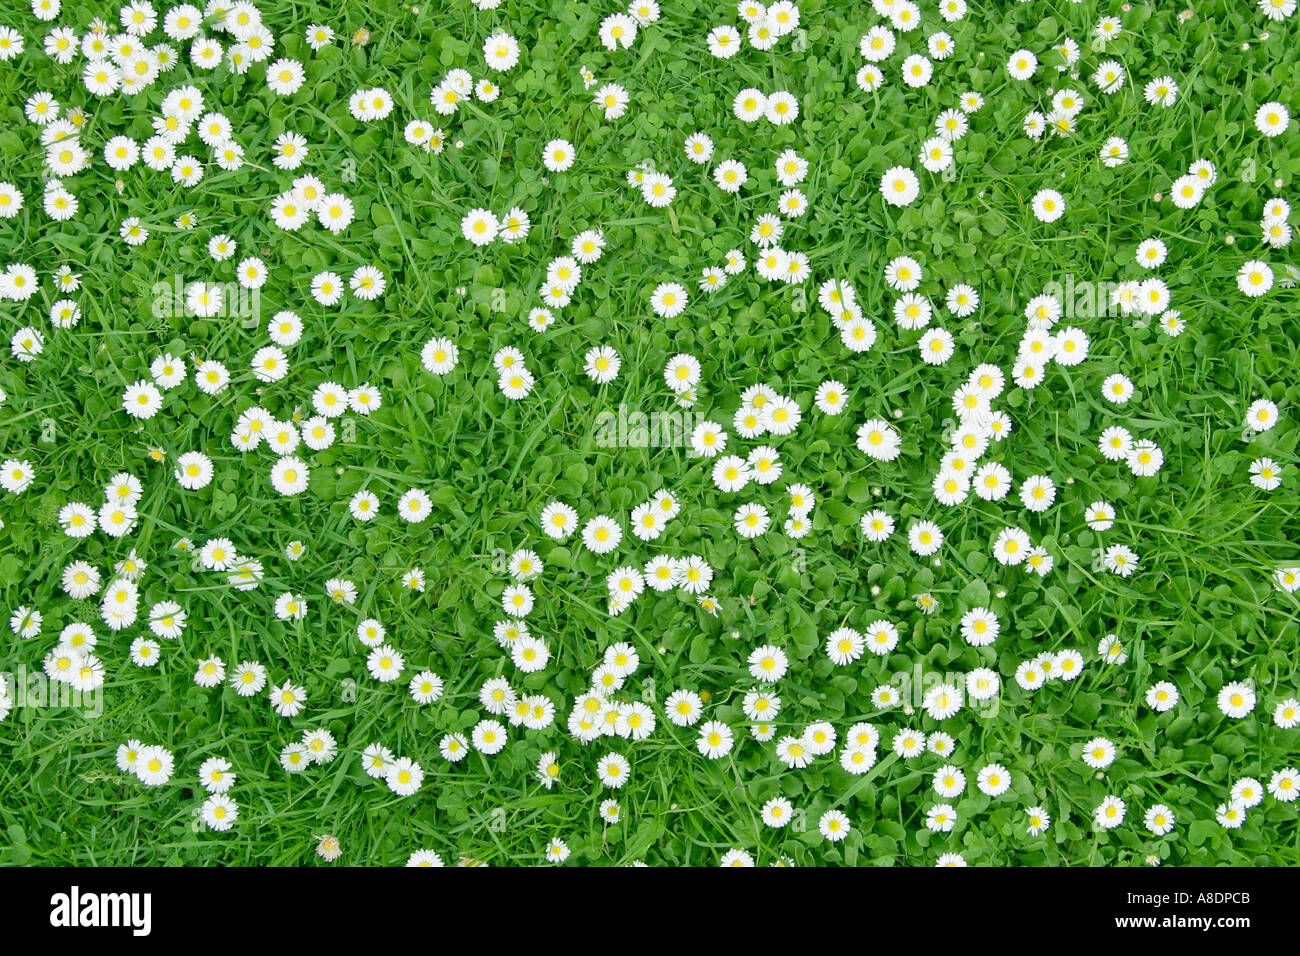 Daisies, Bellis perennis, in a lawn Stock Photo